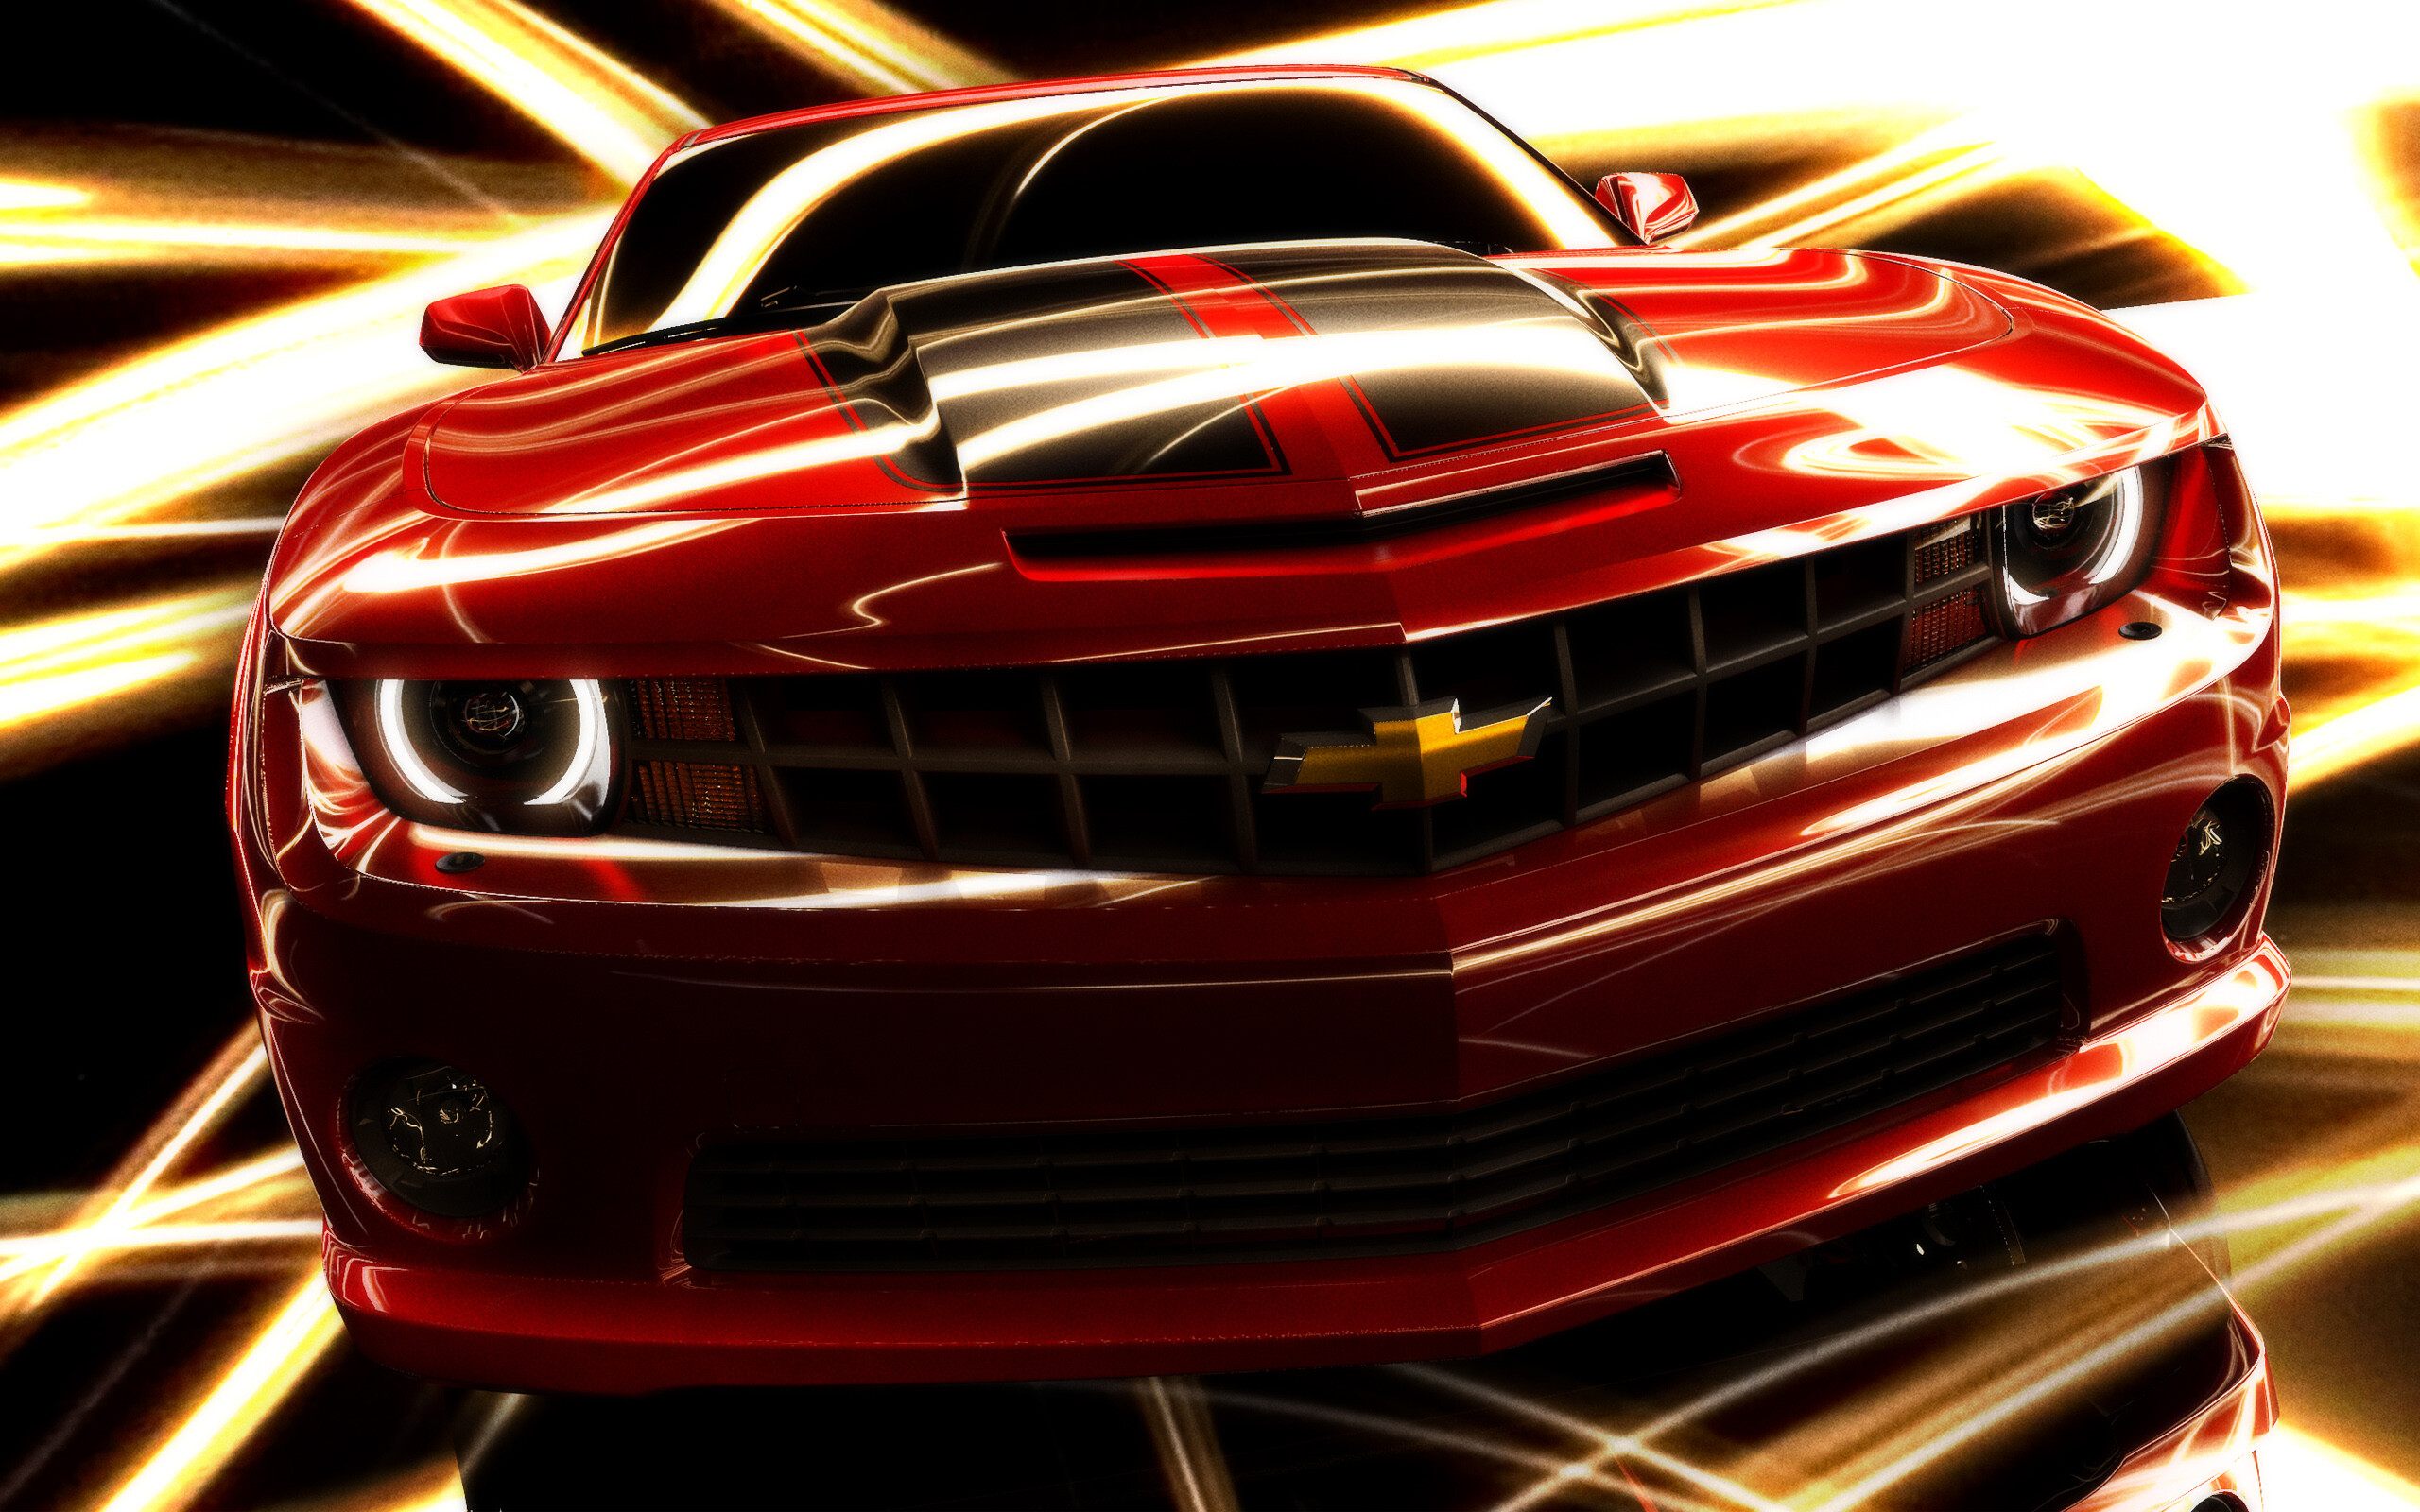 Chevrolet: Famous for its Corvette, Camaro, Silverado, and more recently its SUVs and even electric cars, Chevy has a loyal customer base and is one of the highest-selling brands in the US and across the world. 2560x1600 HD Wallpaper.